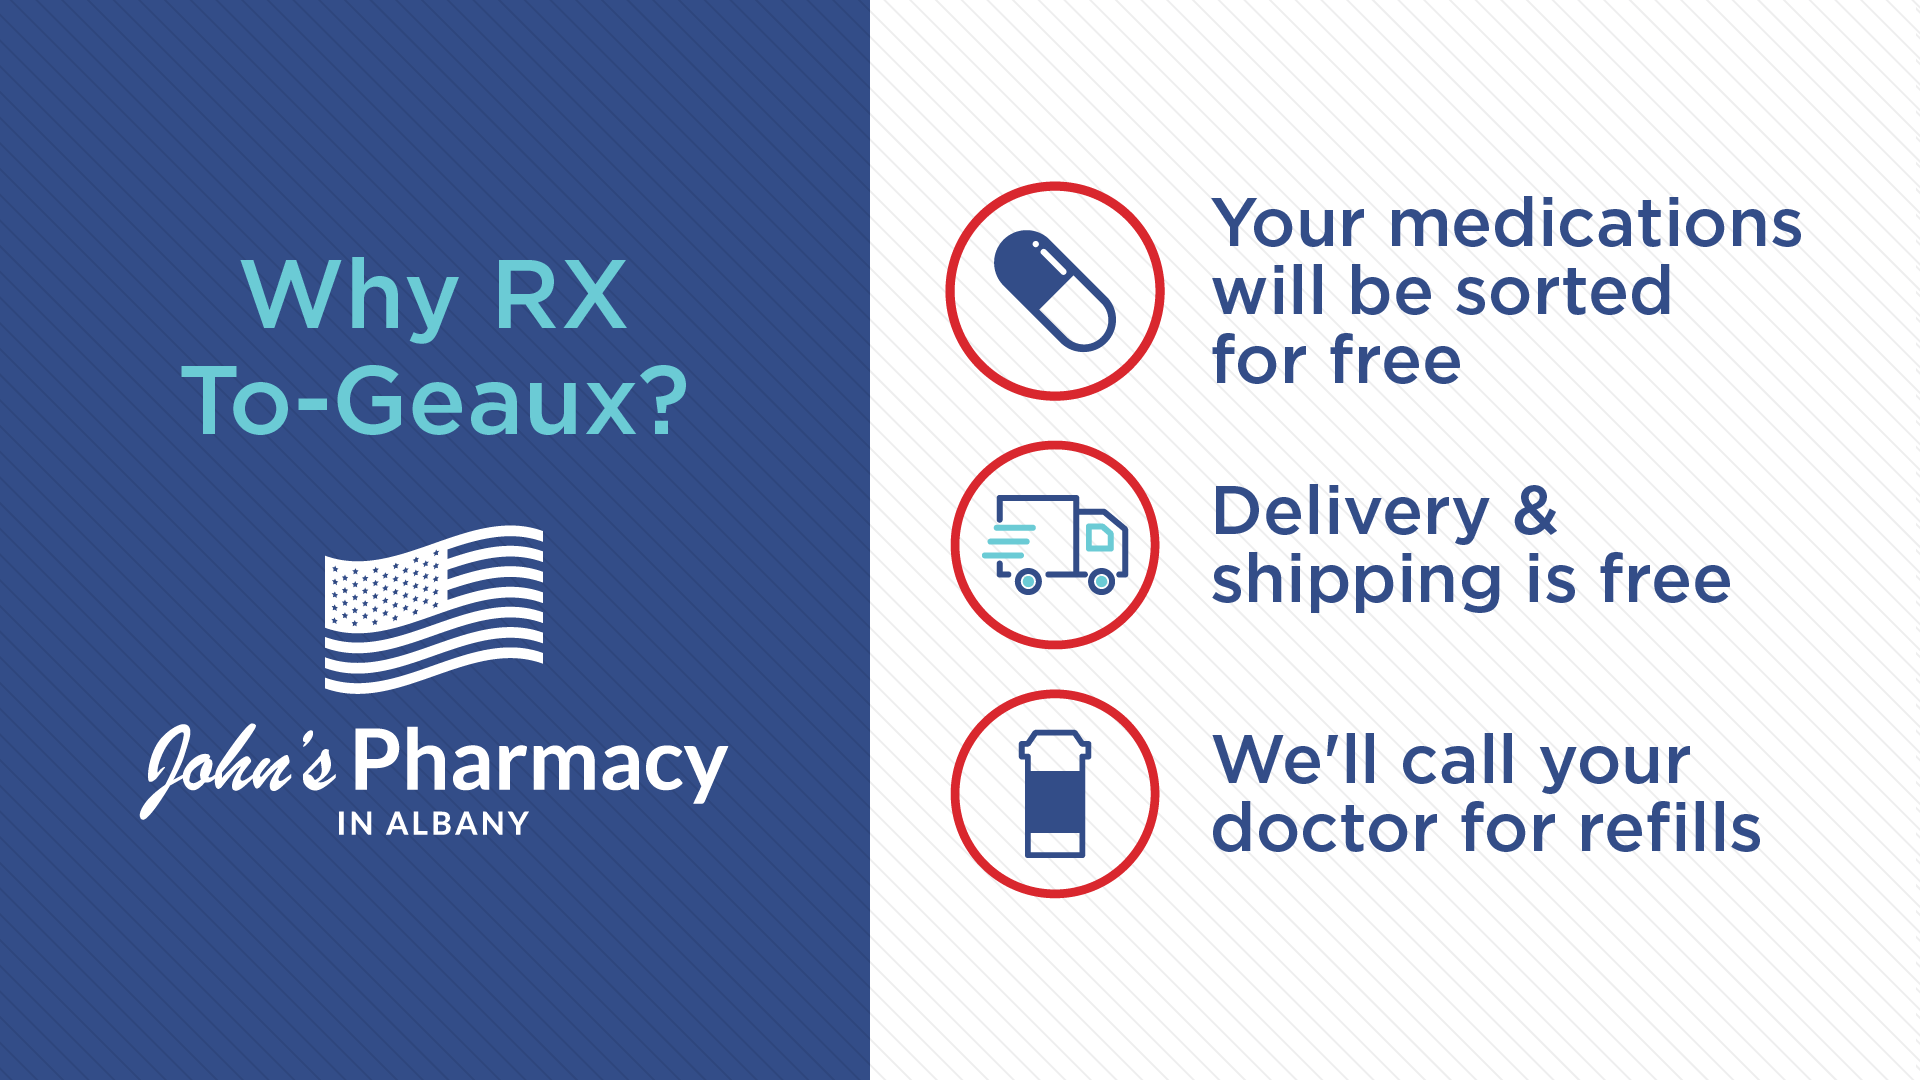 With our Rx to go, compounding and specialty program we want to make it as convenient as possible for our patients. We have delivery drivers who will make deliveries to your home or office if necessary.